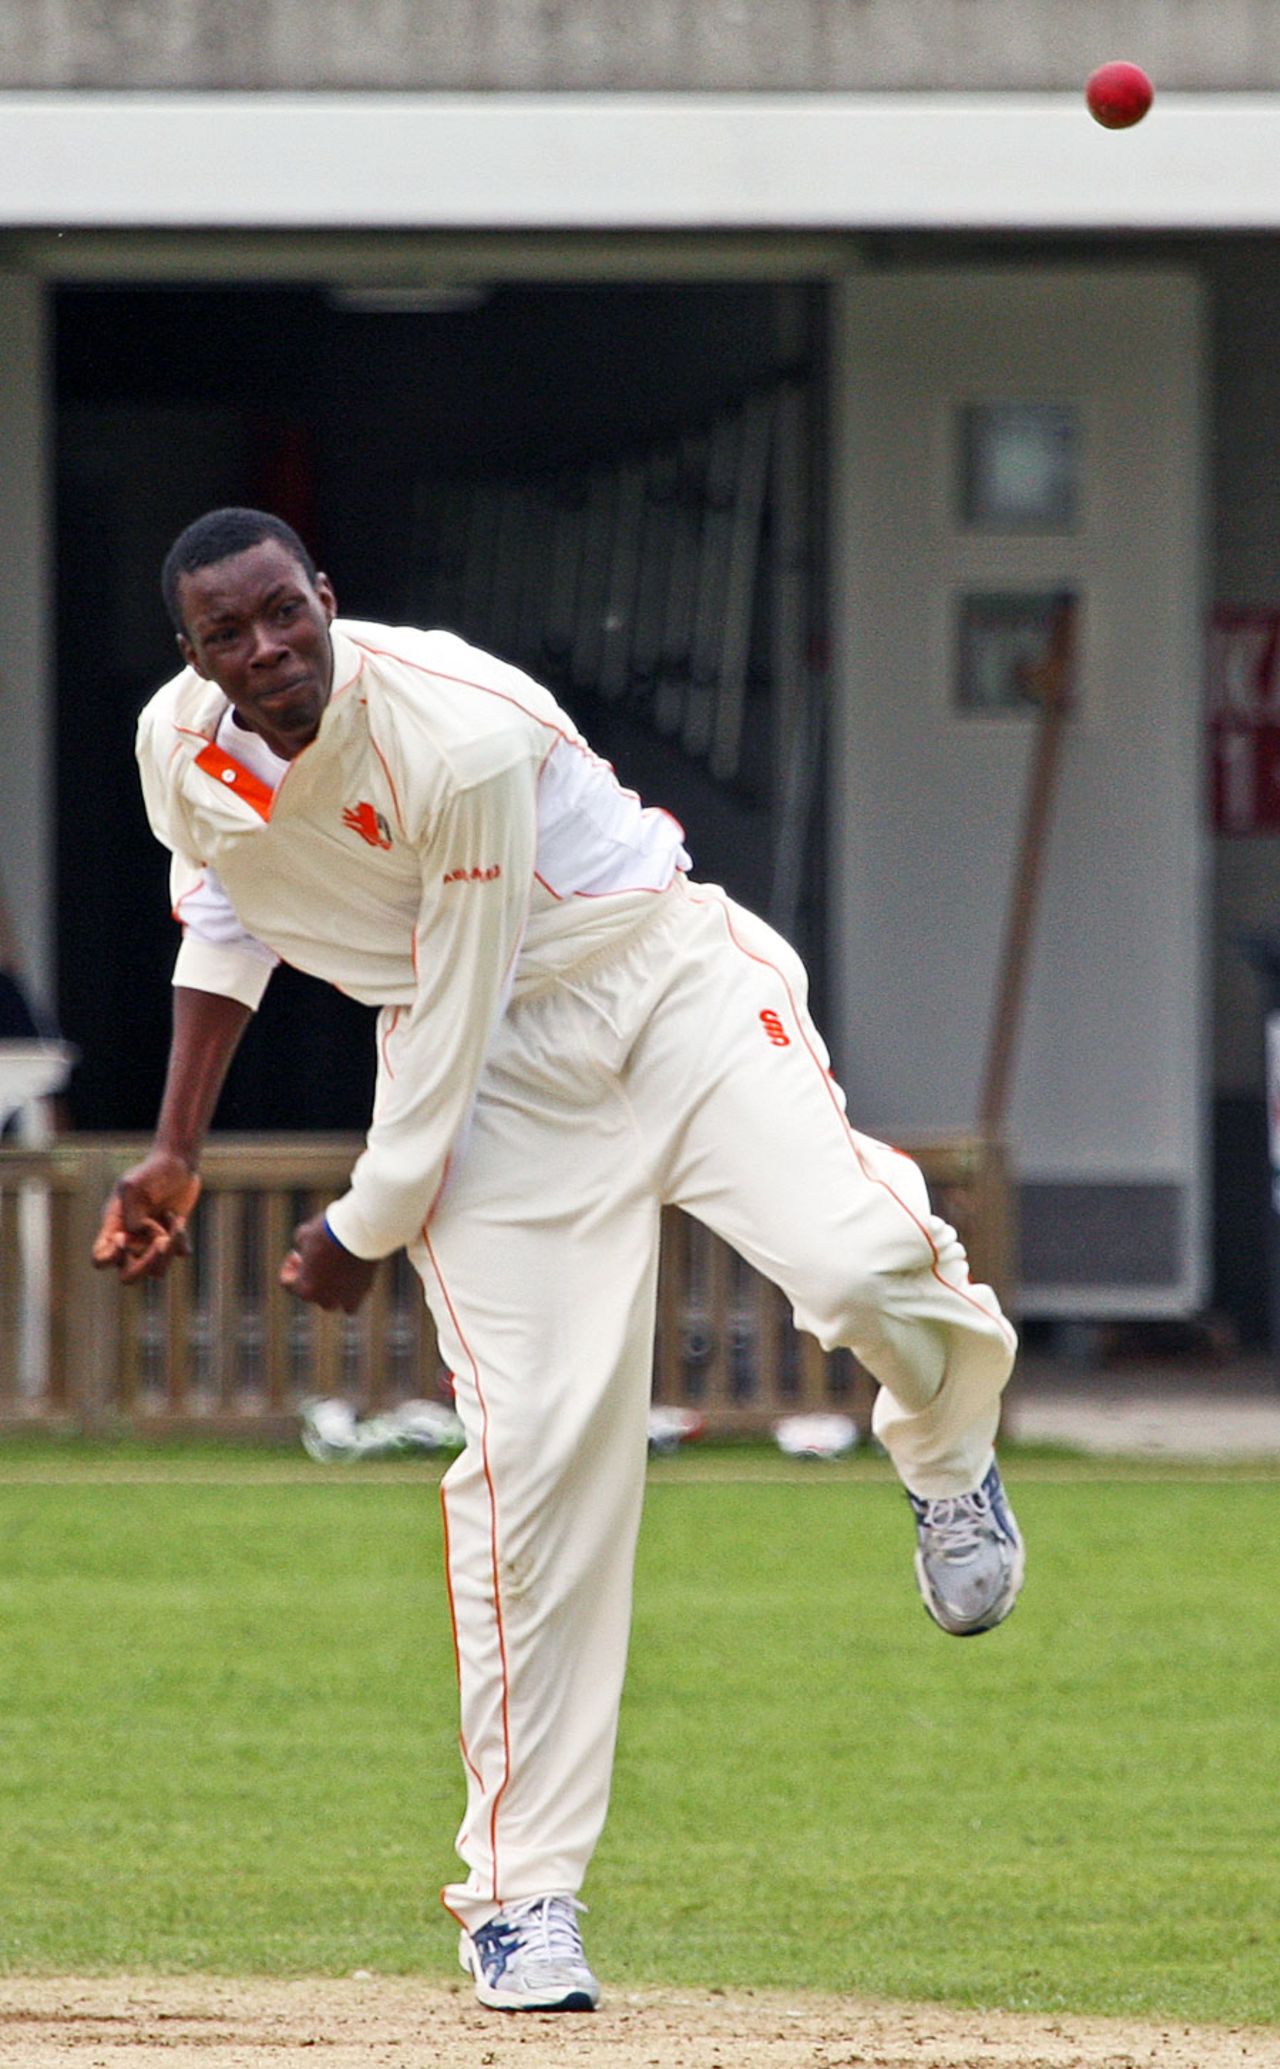 Daniel Doram took five wickets in the innings, Netherlands v Ireland, ICC Intercontinental Cup, 1st day, Deventer, July 1, 2013